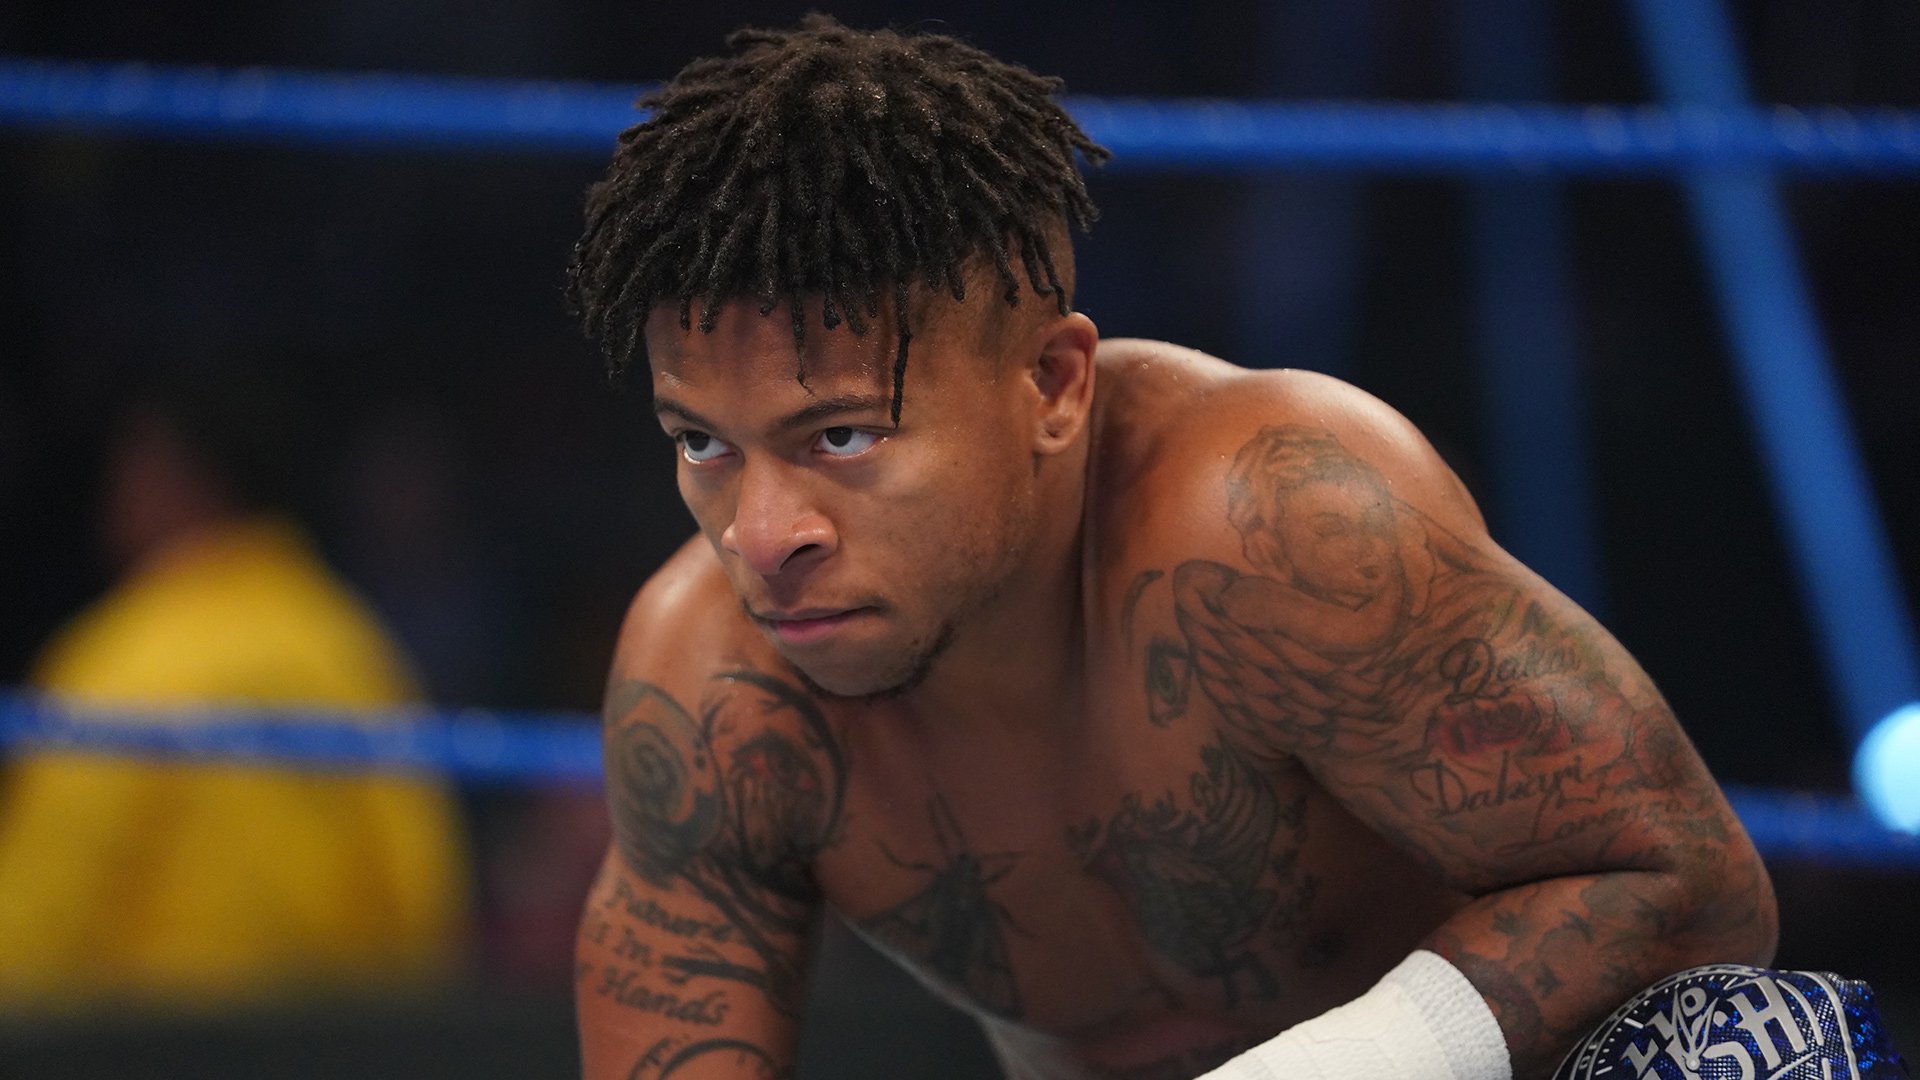 Lio Rush Joins Only Fans.